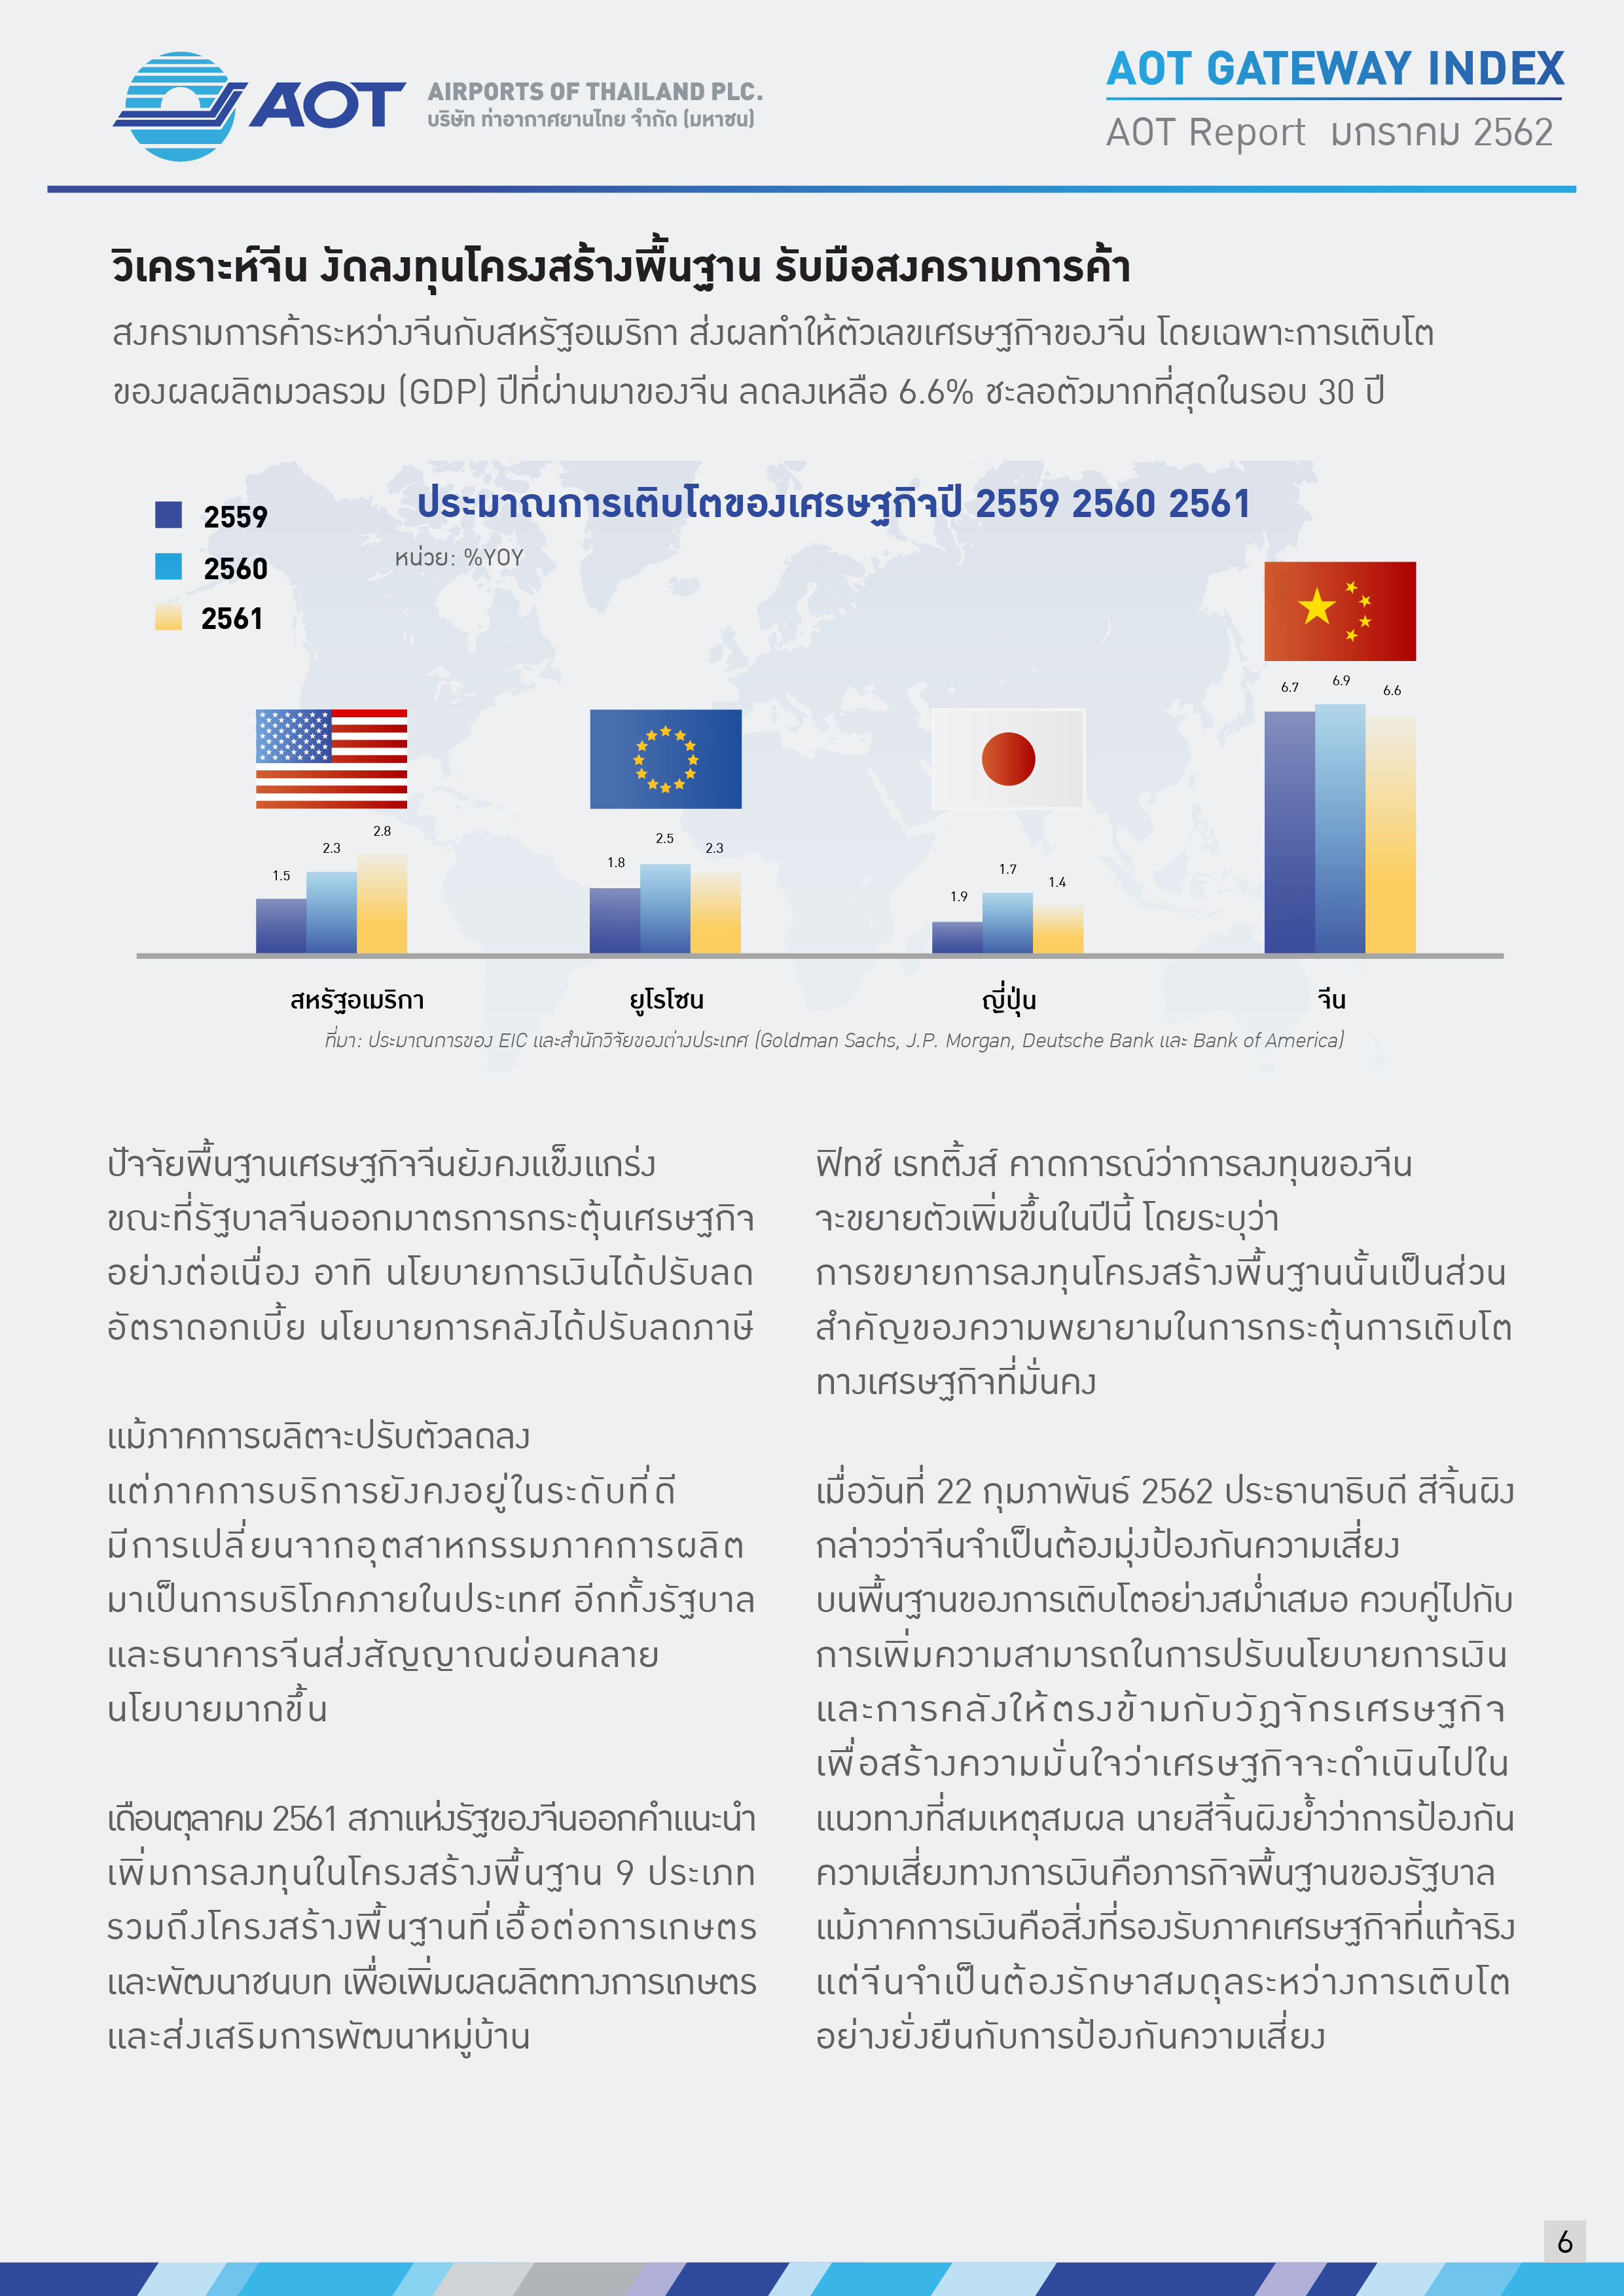 AOTcontent2019_Index_02_เศรษฐกิจโลก_V5_20190401_Page06